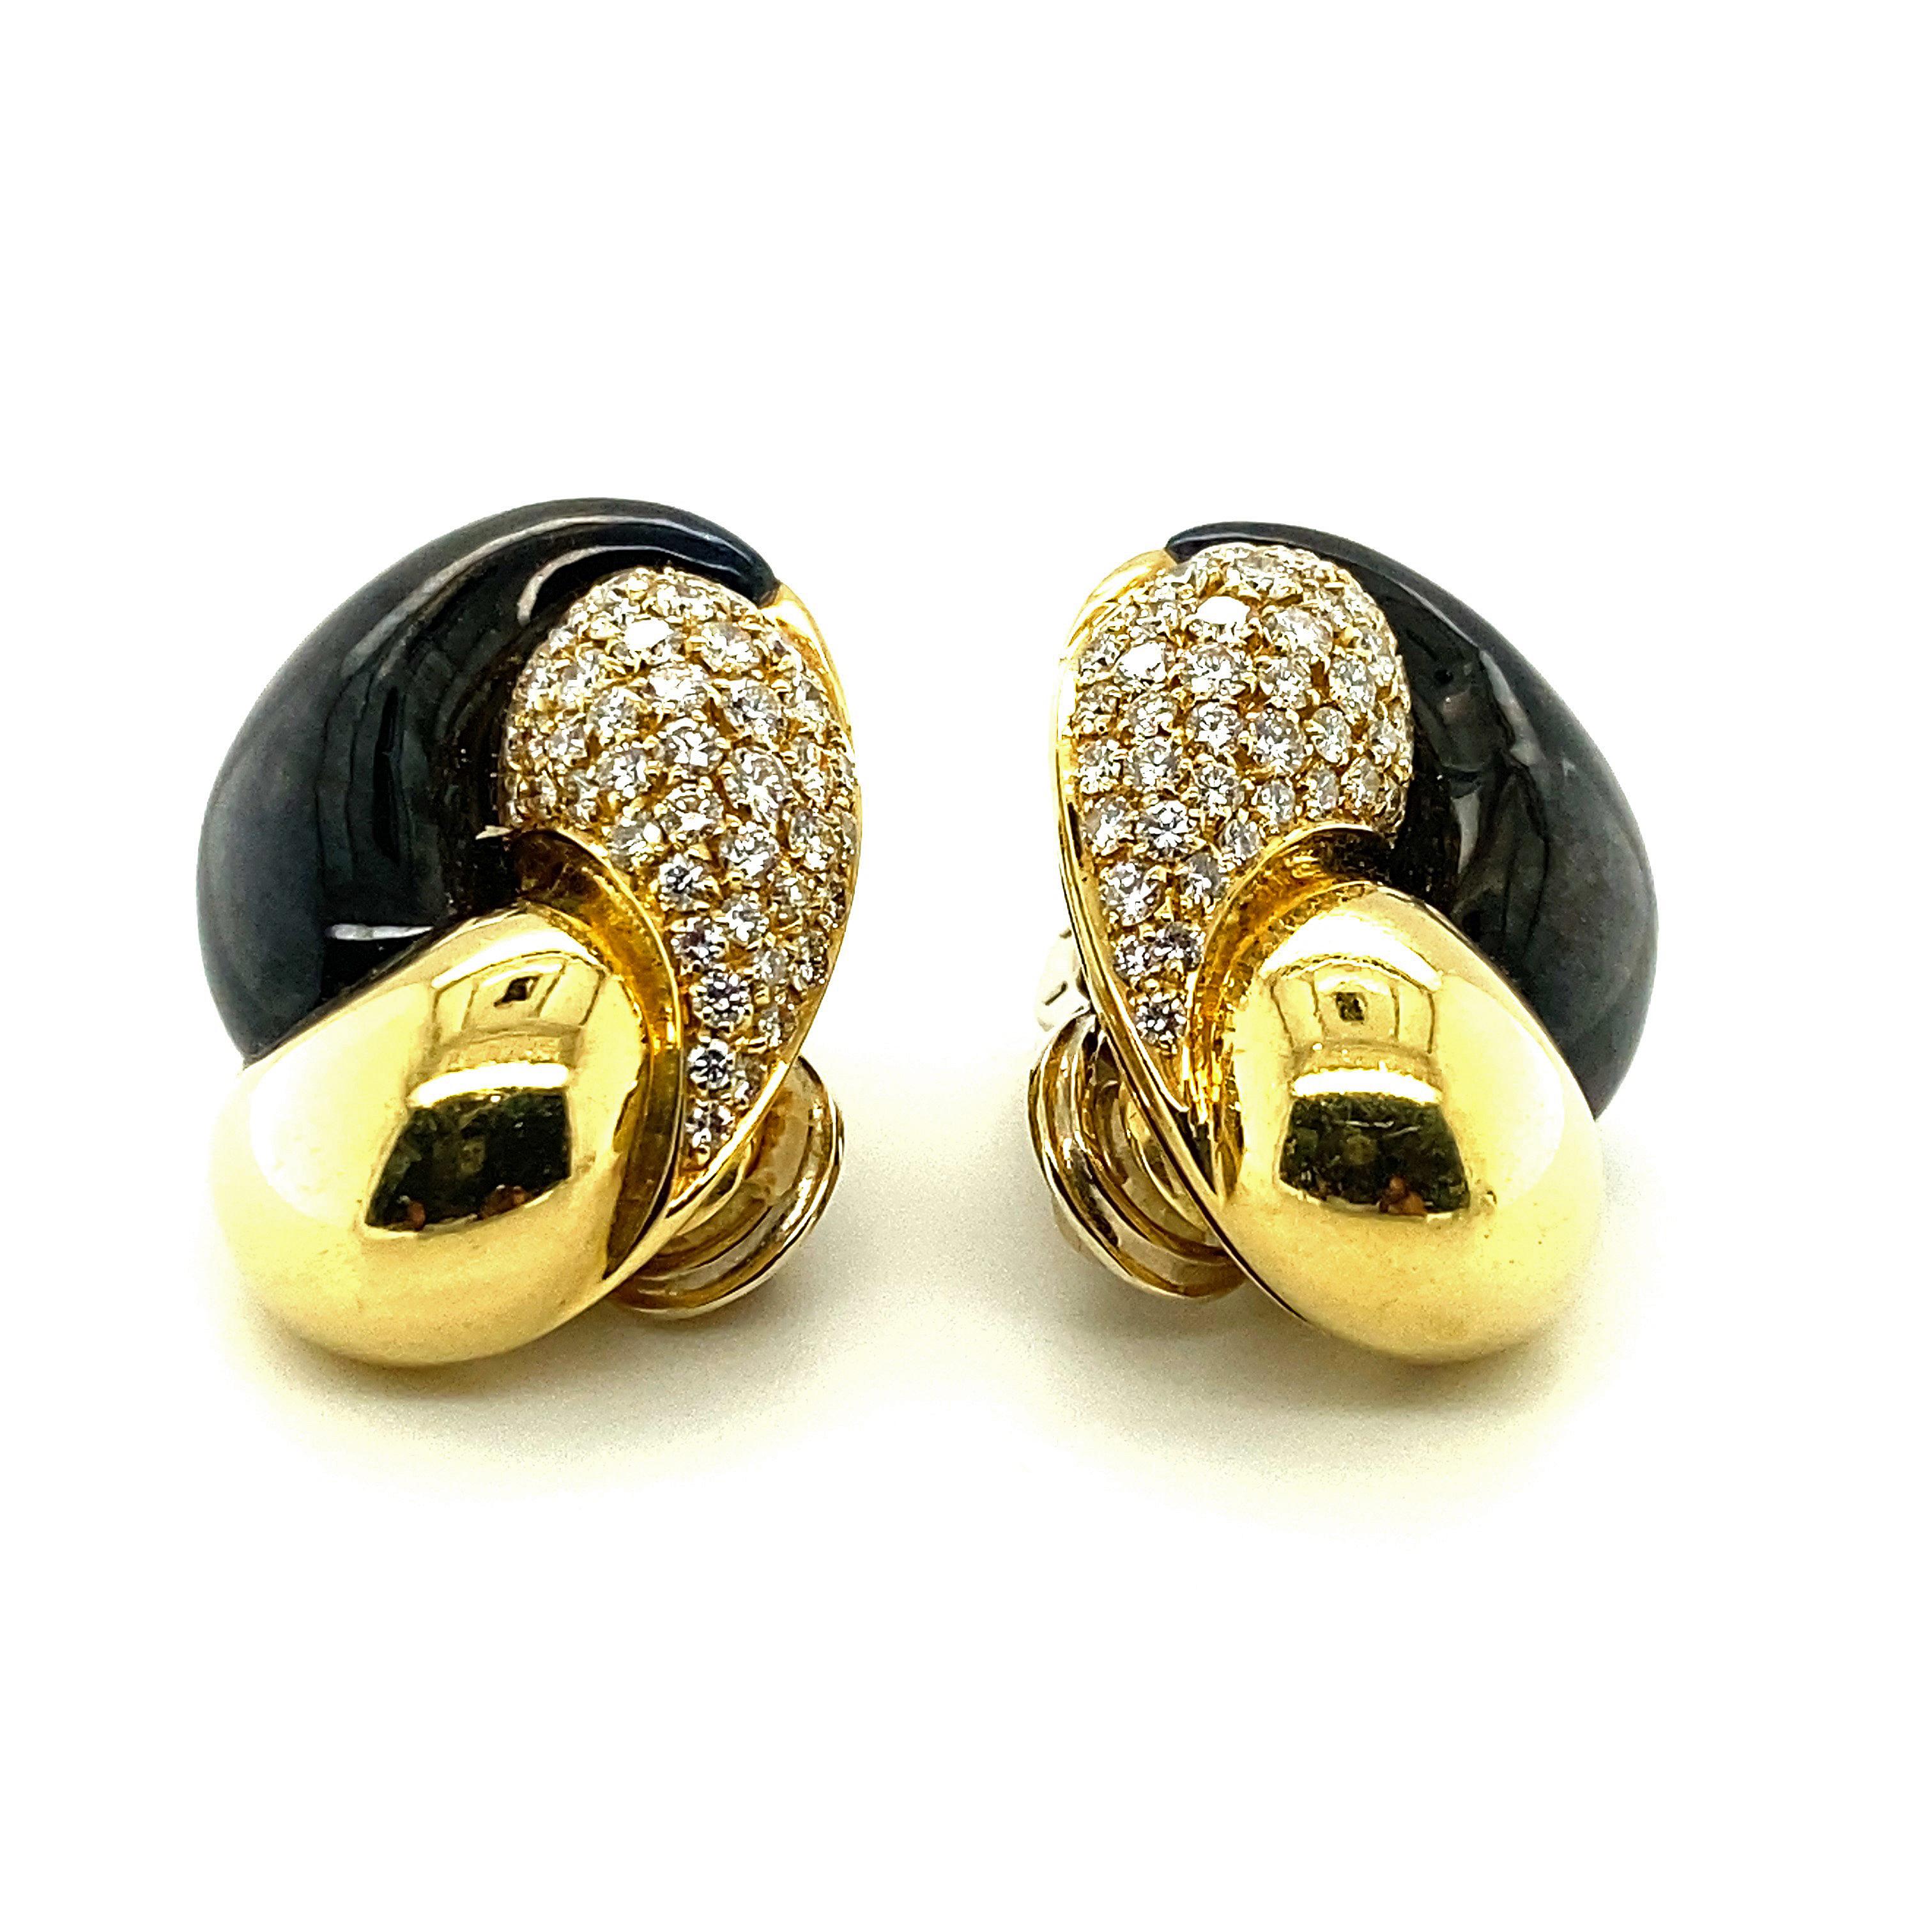 A pair of 3-section swirl-motif earrings composed of polished 18k gold, highly reflective hematite, and approximately 2 1/2cts of pave-set diamonds combined together in a profile of curved contours and distinct yet complementary colors.  

Stamped